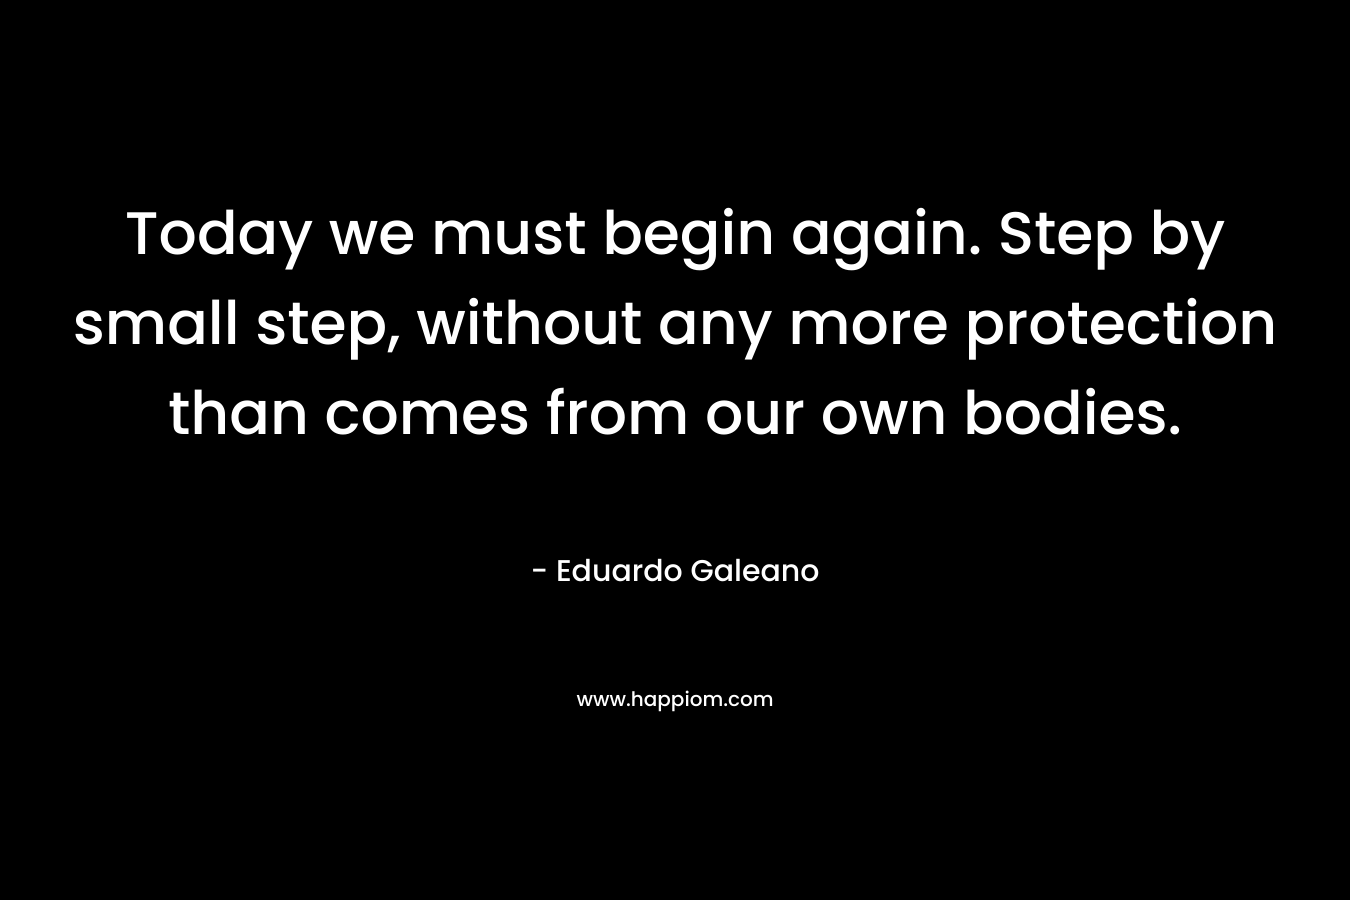 Today we must begin again. Step by small step, without any more protection than comes from our own bodies.